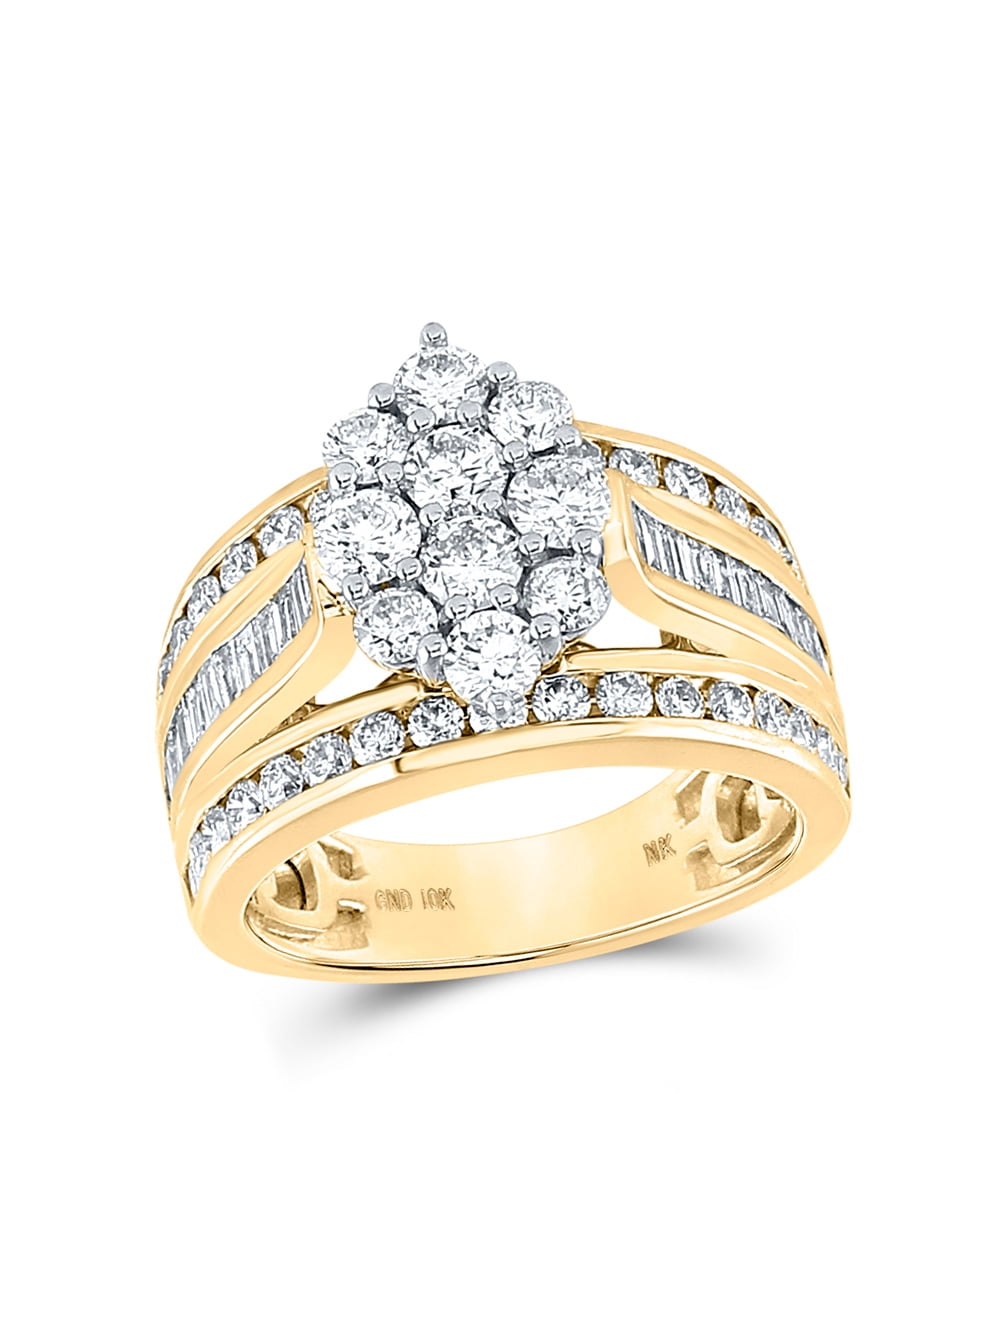 Details about   14K Yellow Gold Over Ladies Round Cut Diamond Wedding Bridal Engagement Ring Set 